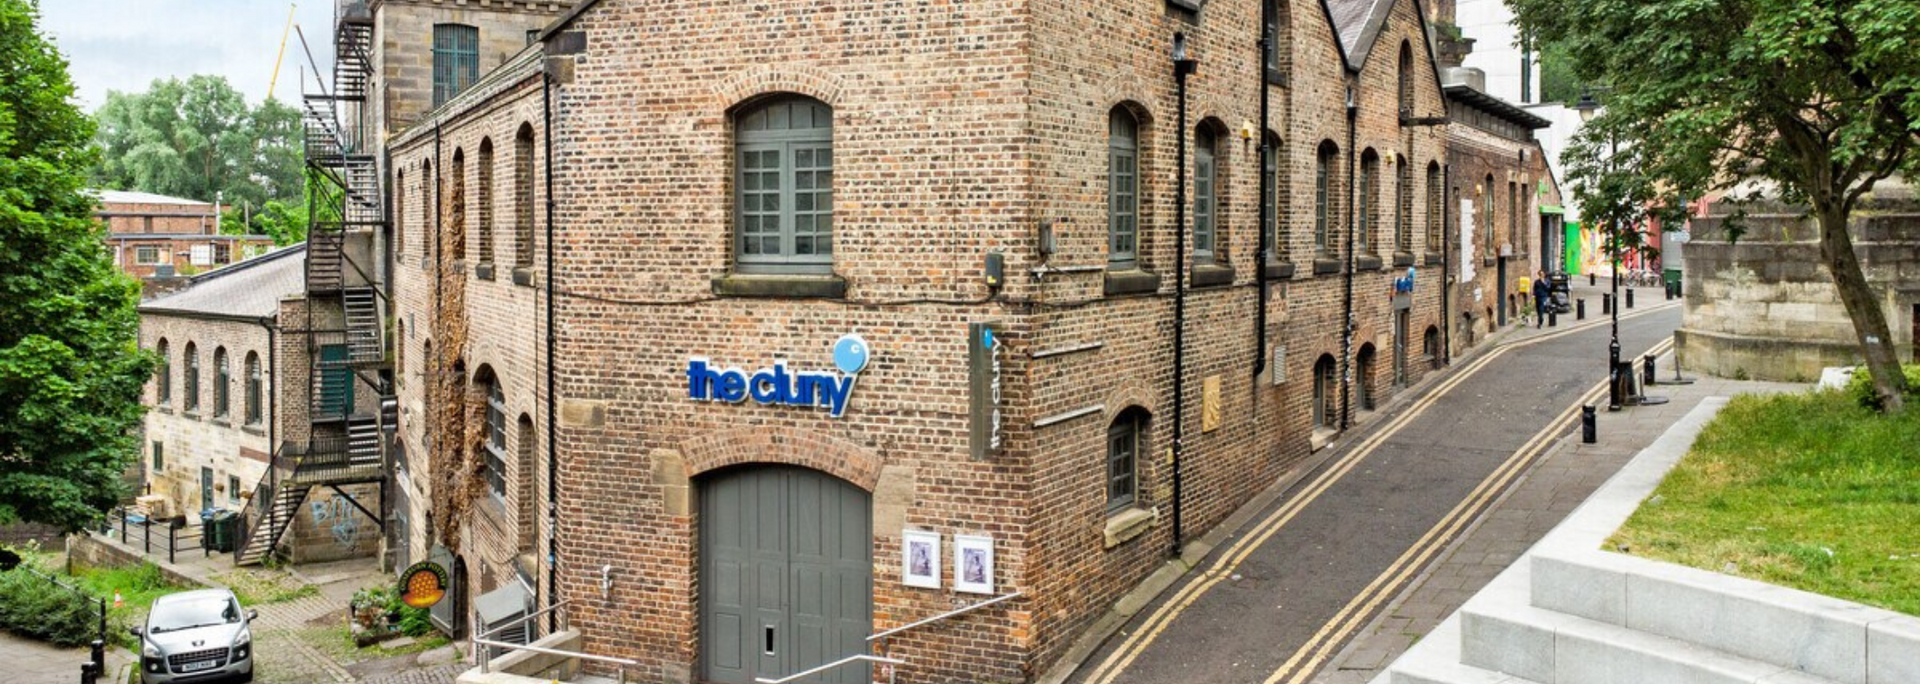 Picture of The Cluny, Newcastle